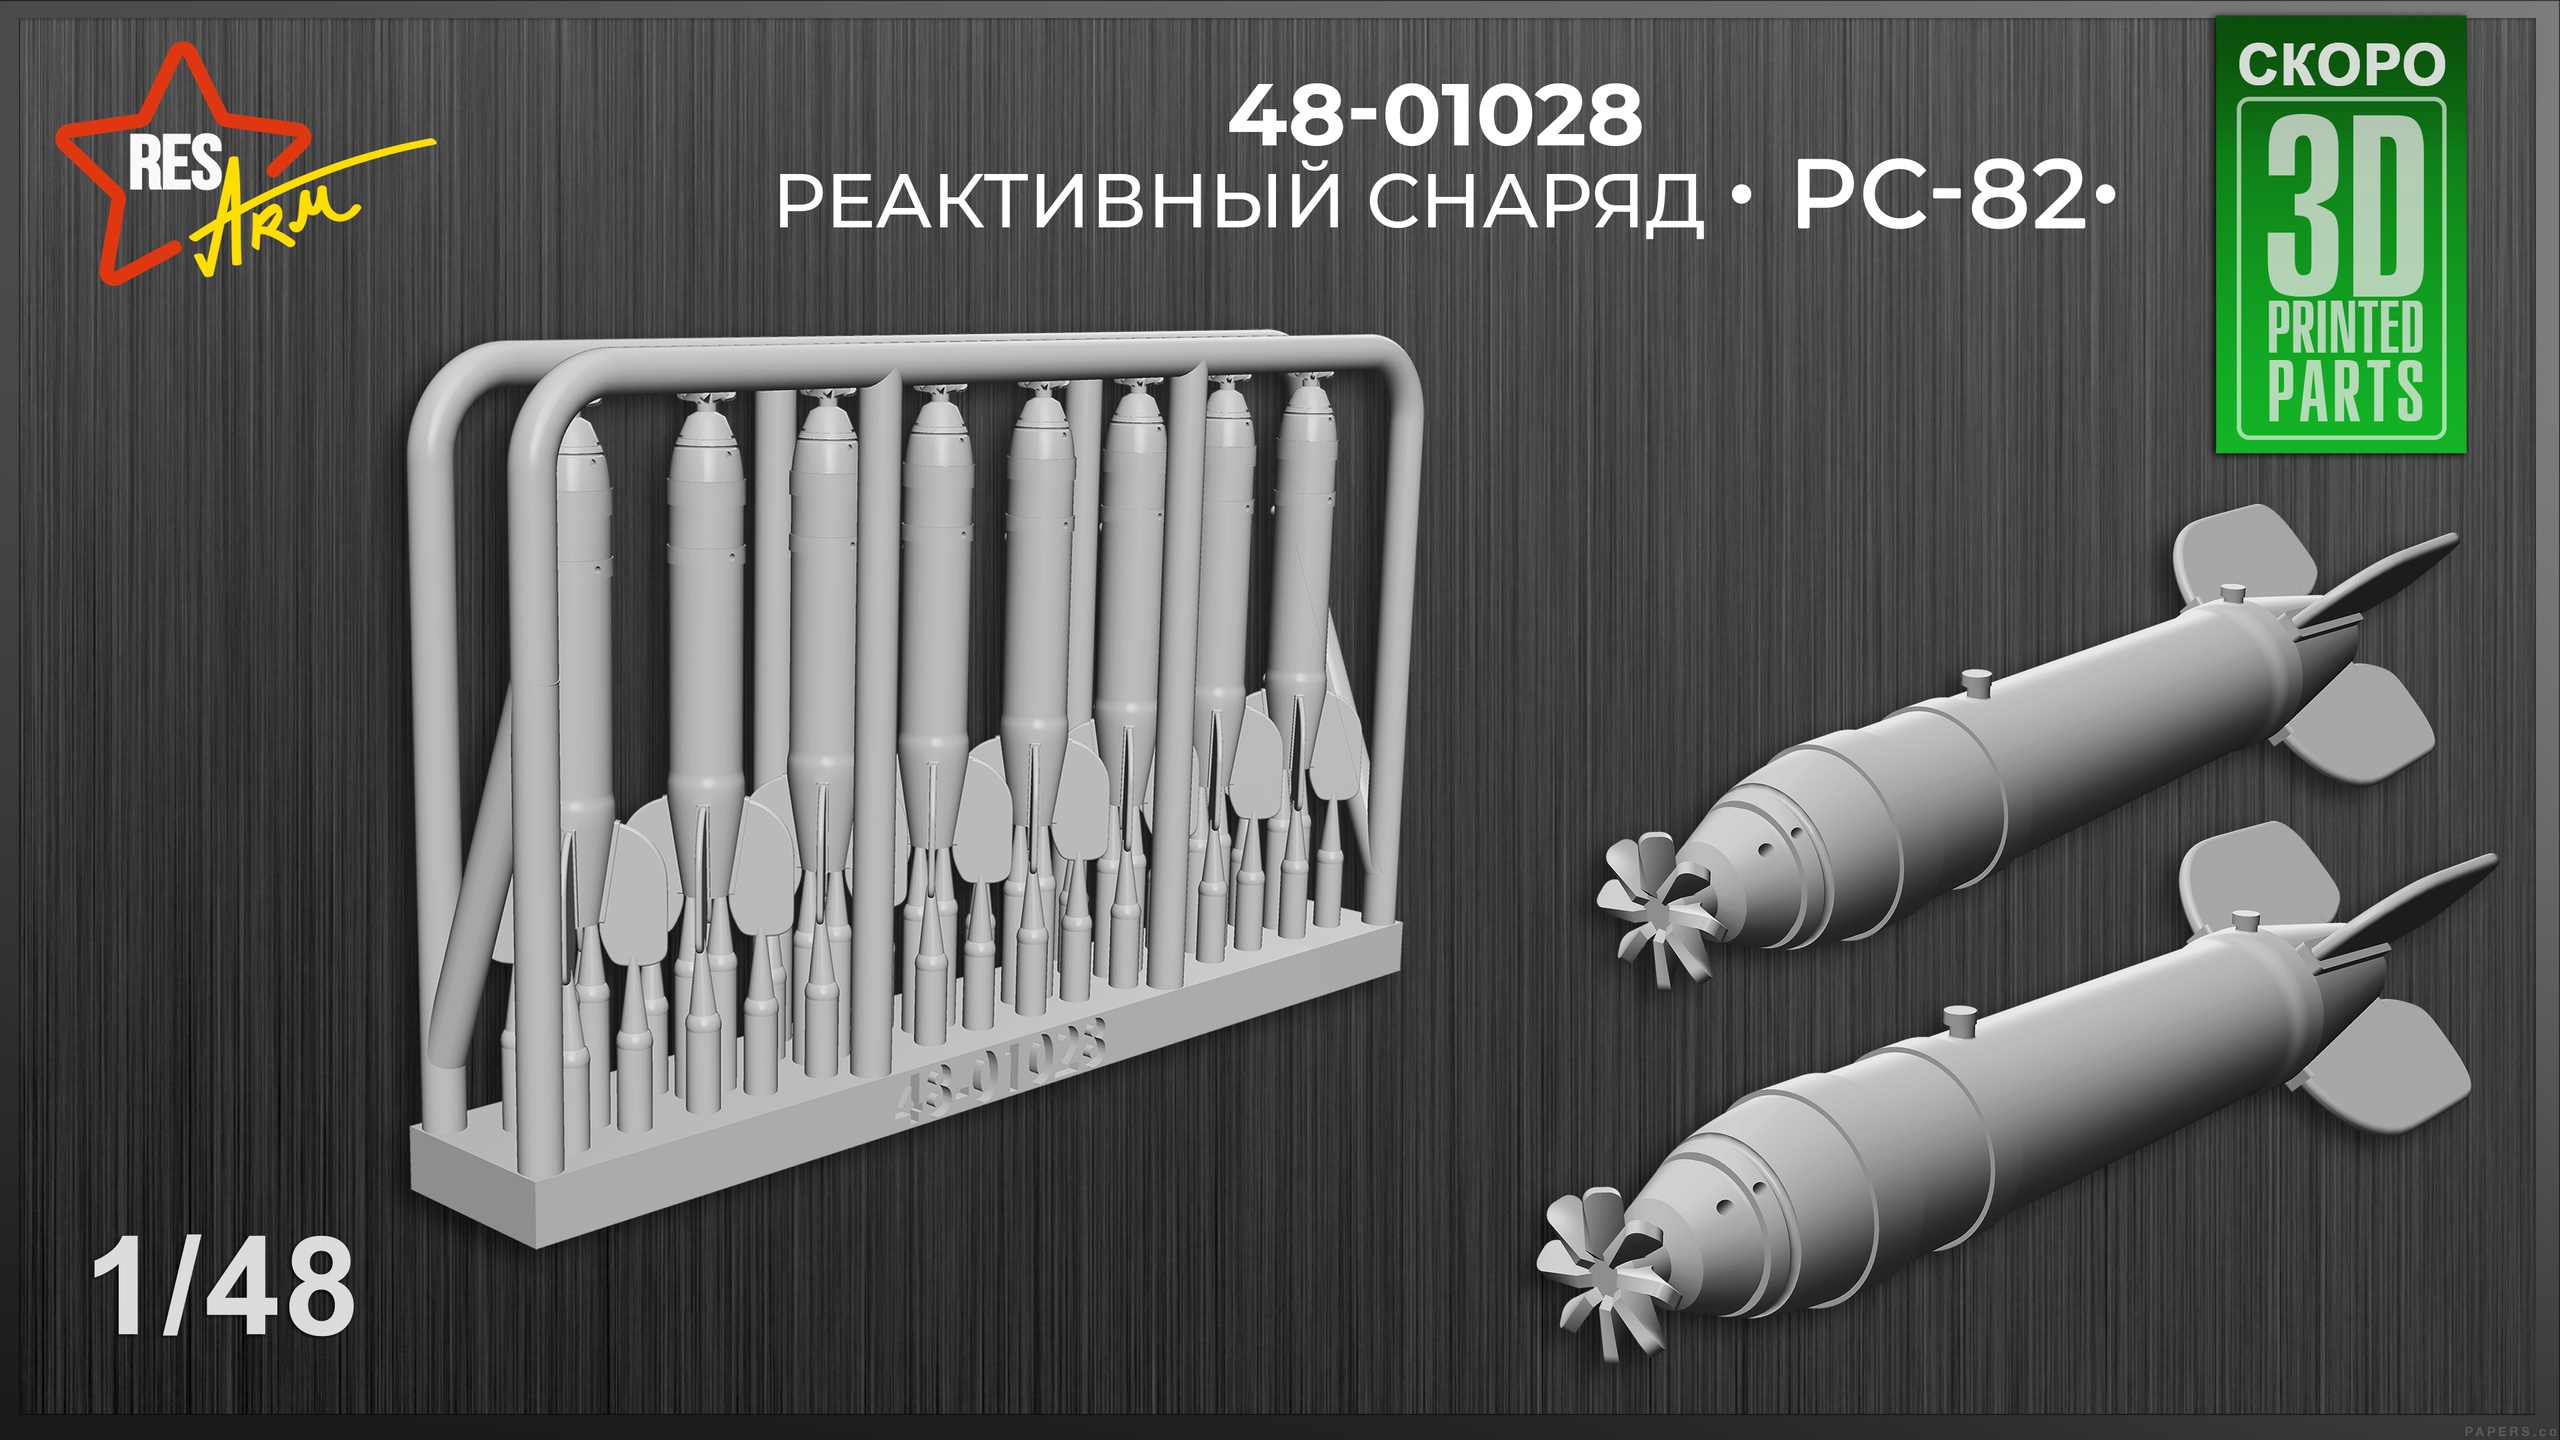 Additions (3D resin printing) 1/48 RS-82 rocket launcher (RESArm)